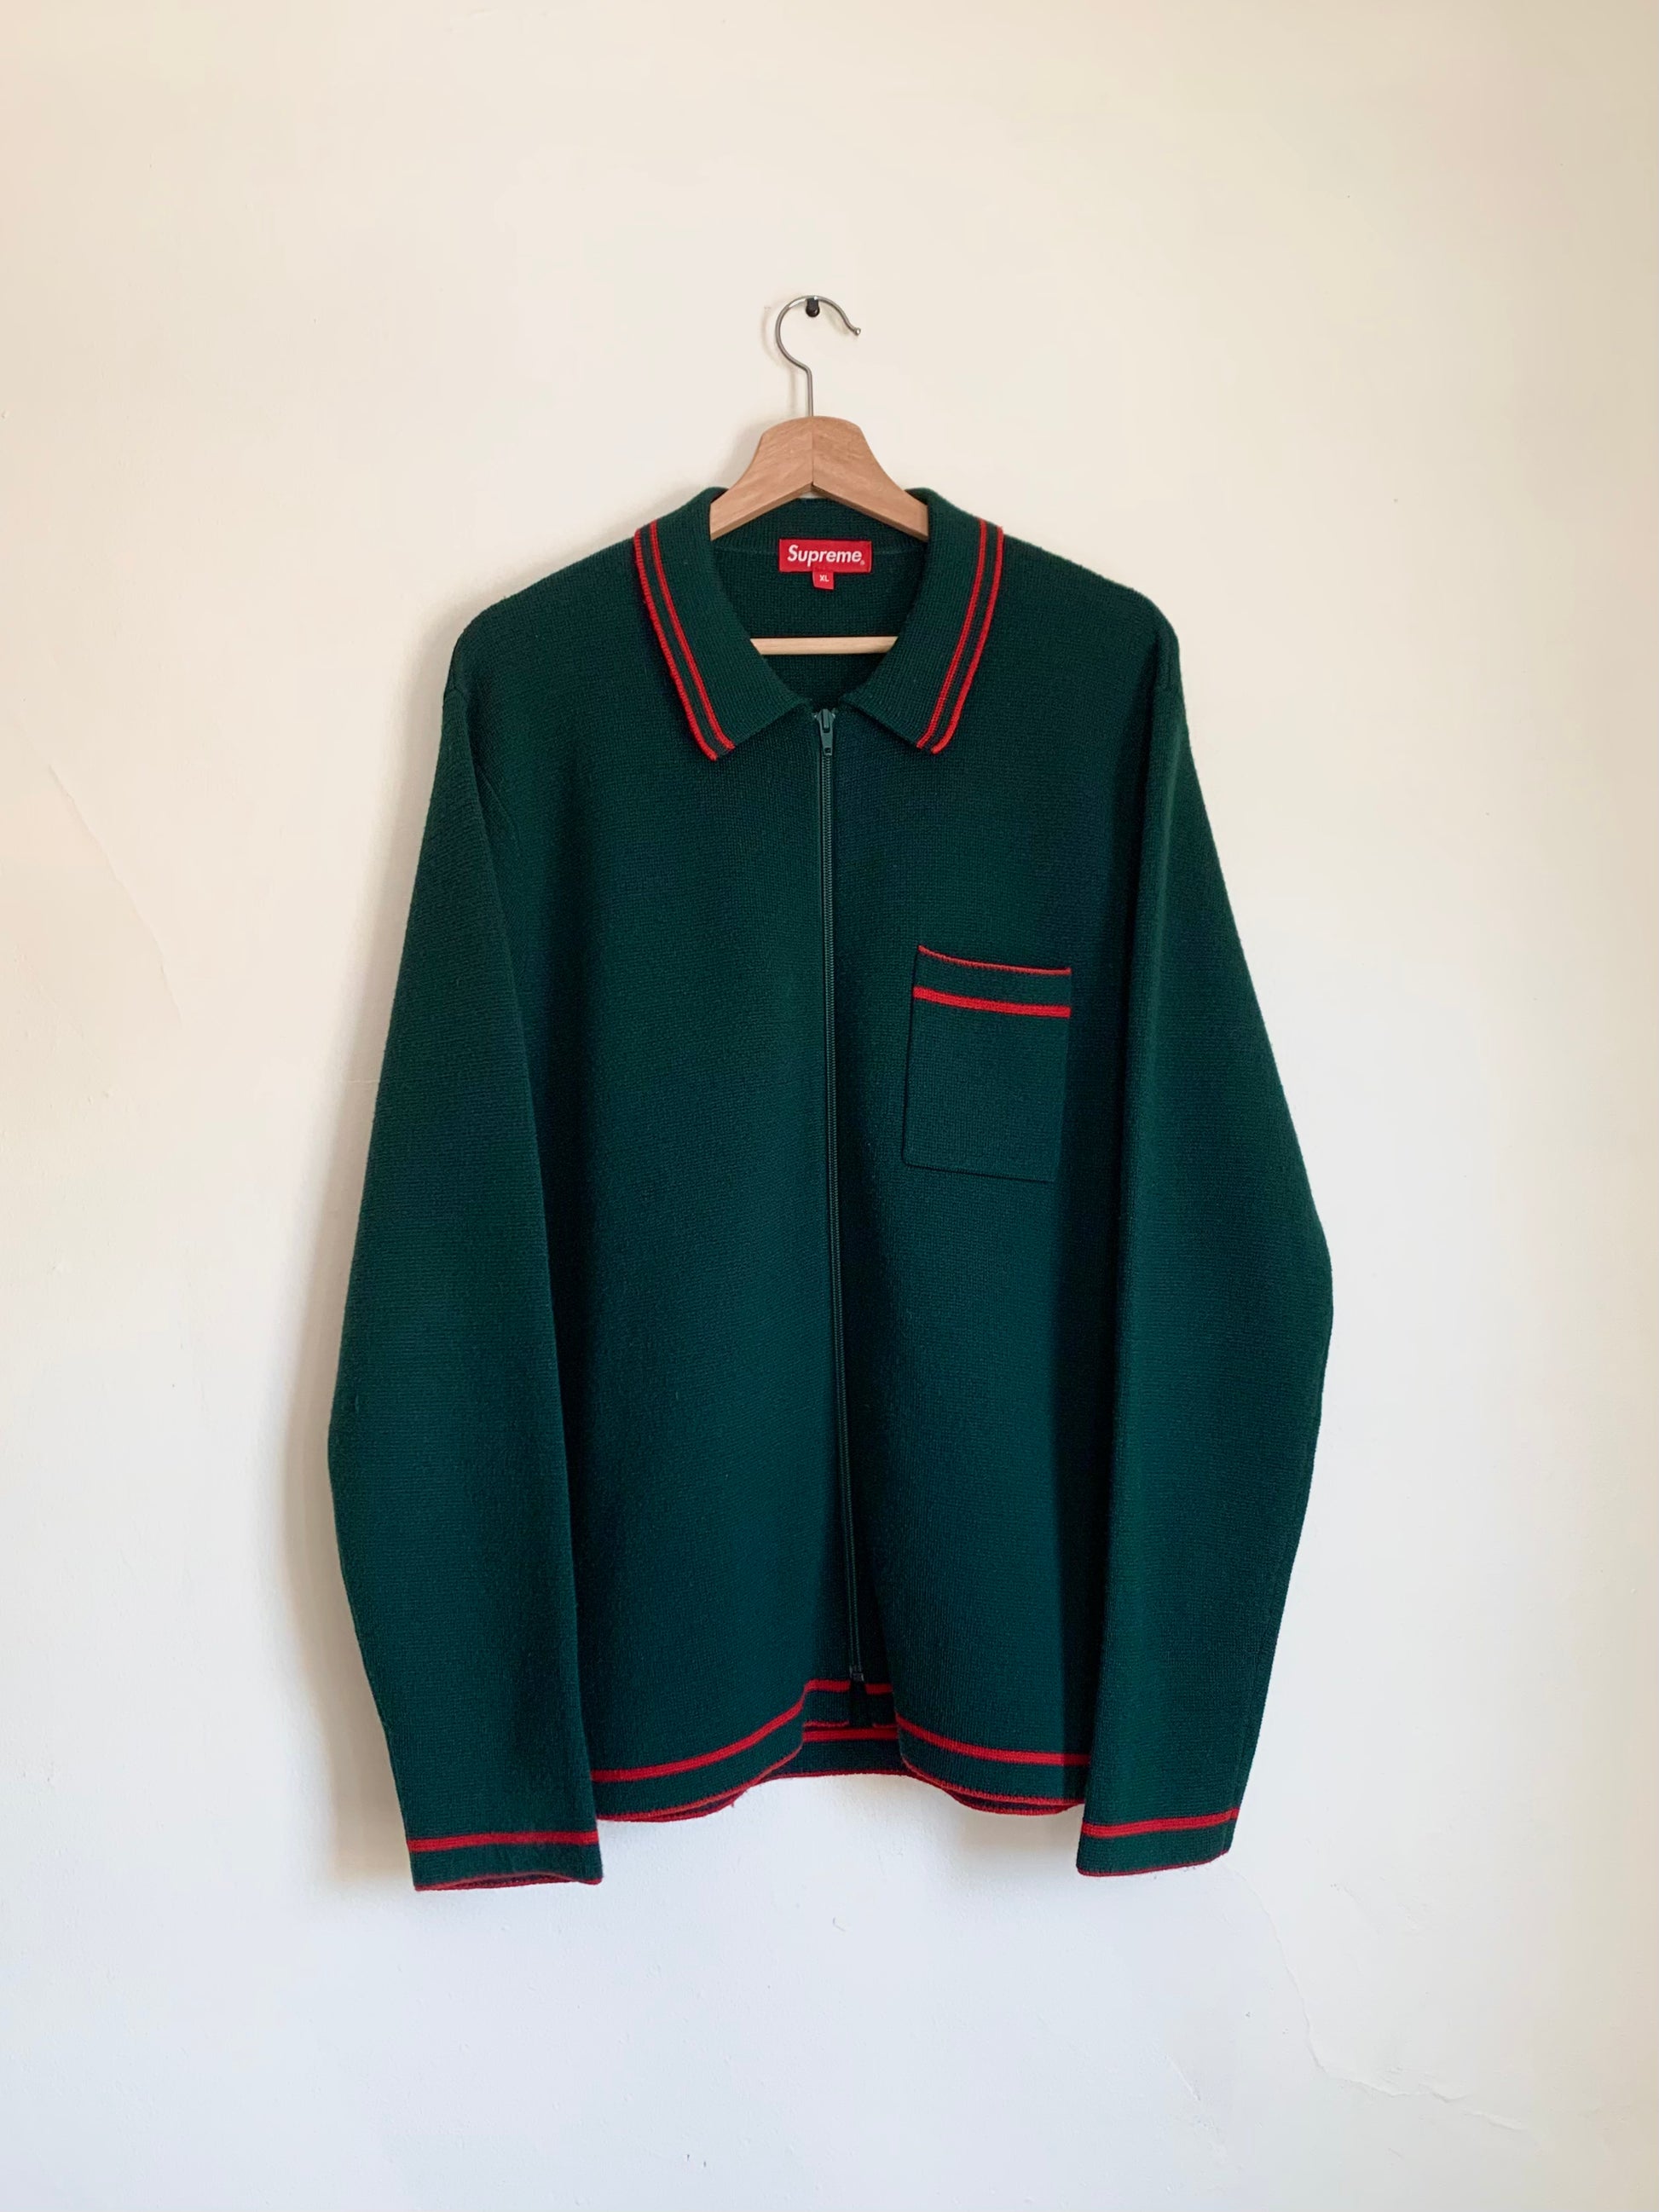 RUSHOLME - Supreme Zip Up Polo Sweater (FW16)